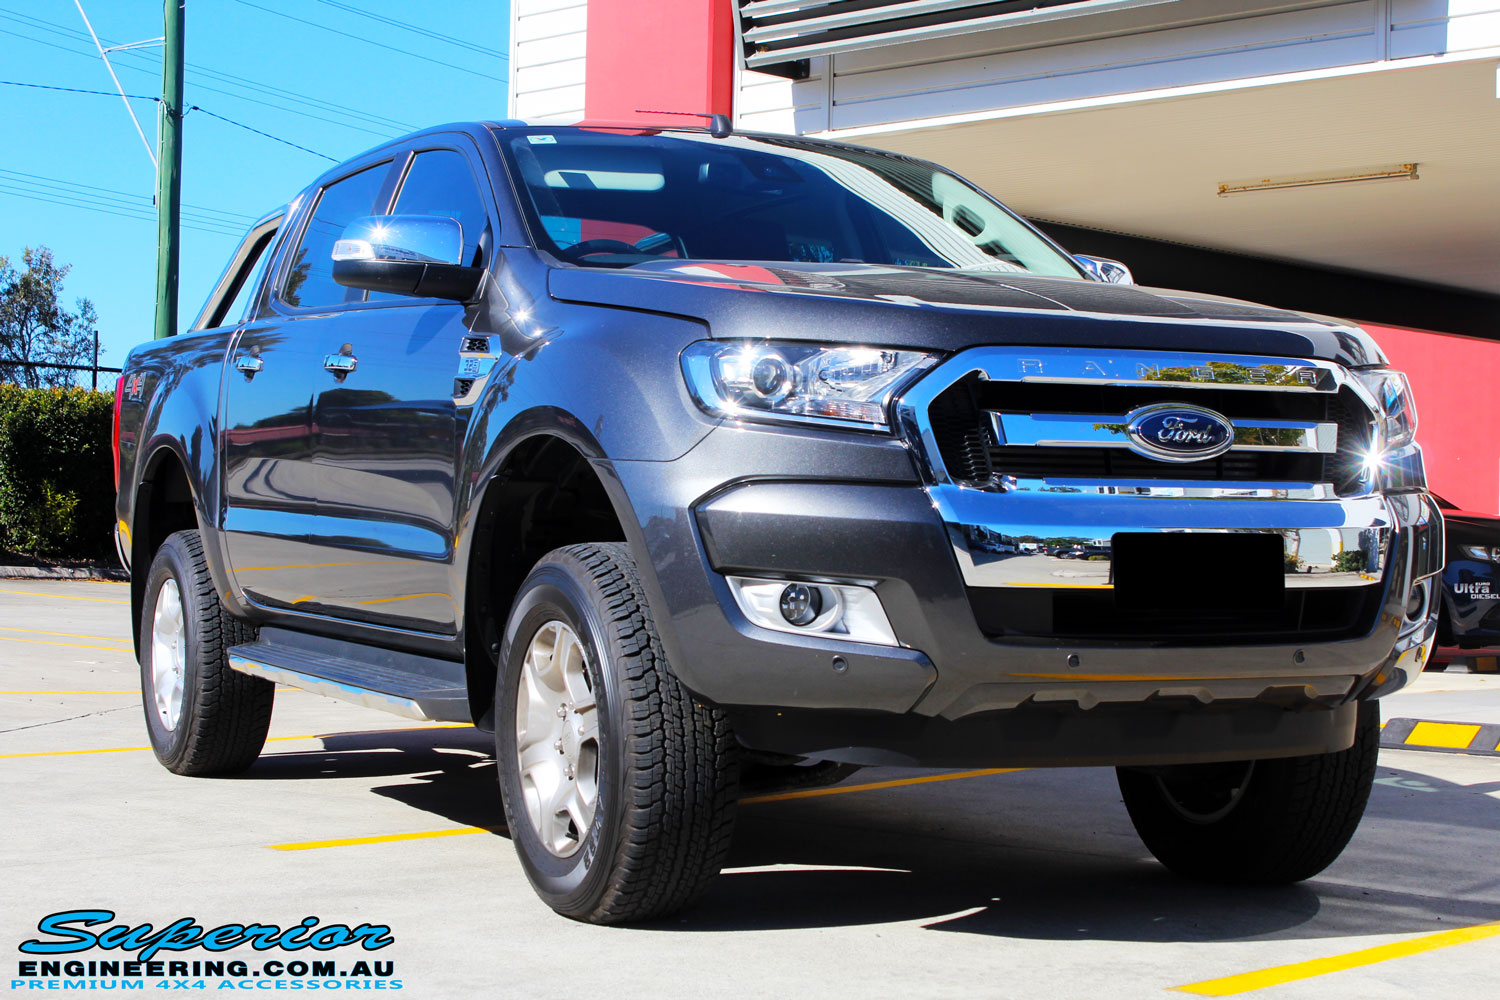 Right front side view of a Ford PXII Ranger in Grey after fitment of a Super Pro Ezy Lift 45mm Lift Kit